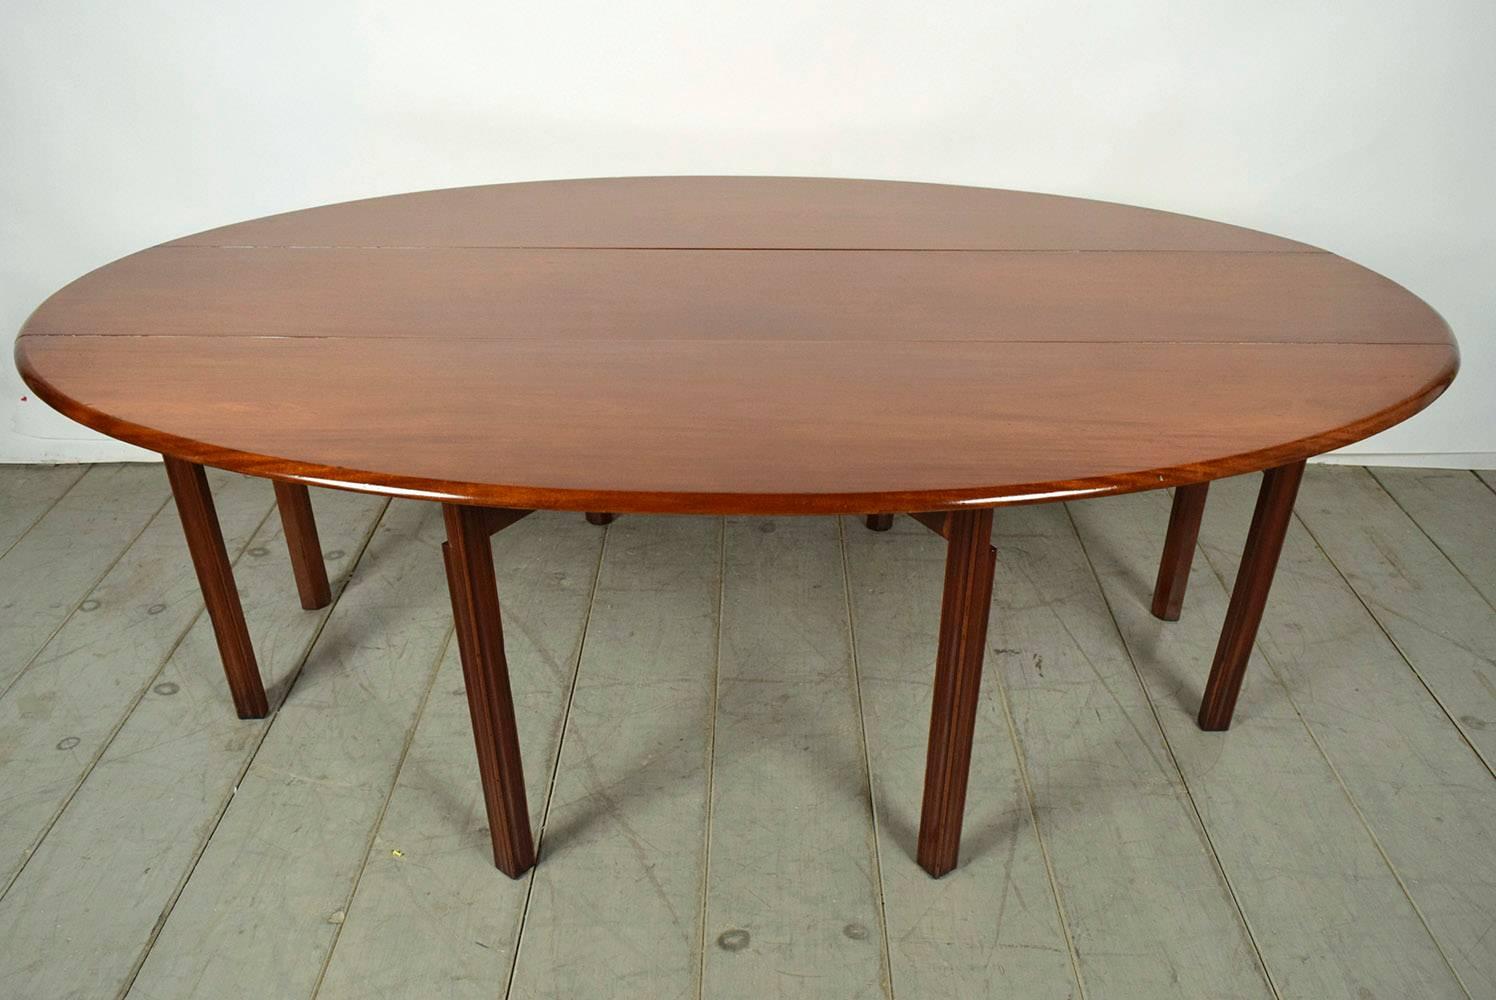 20th Century George III-Style Wake or Hunt Dining Table